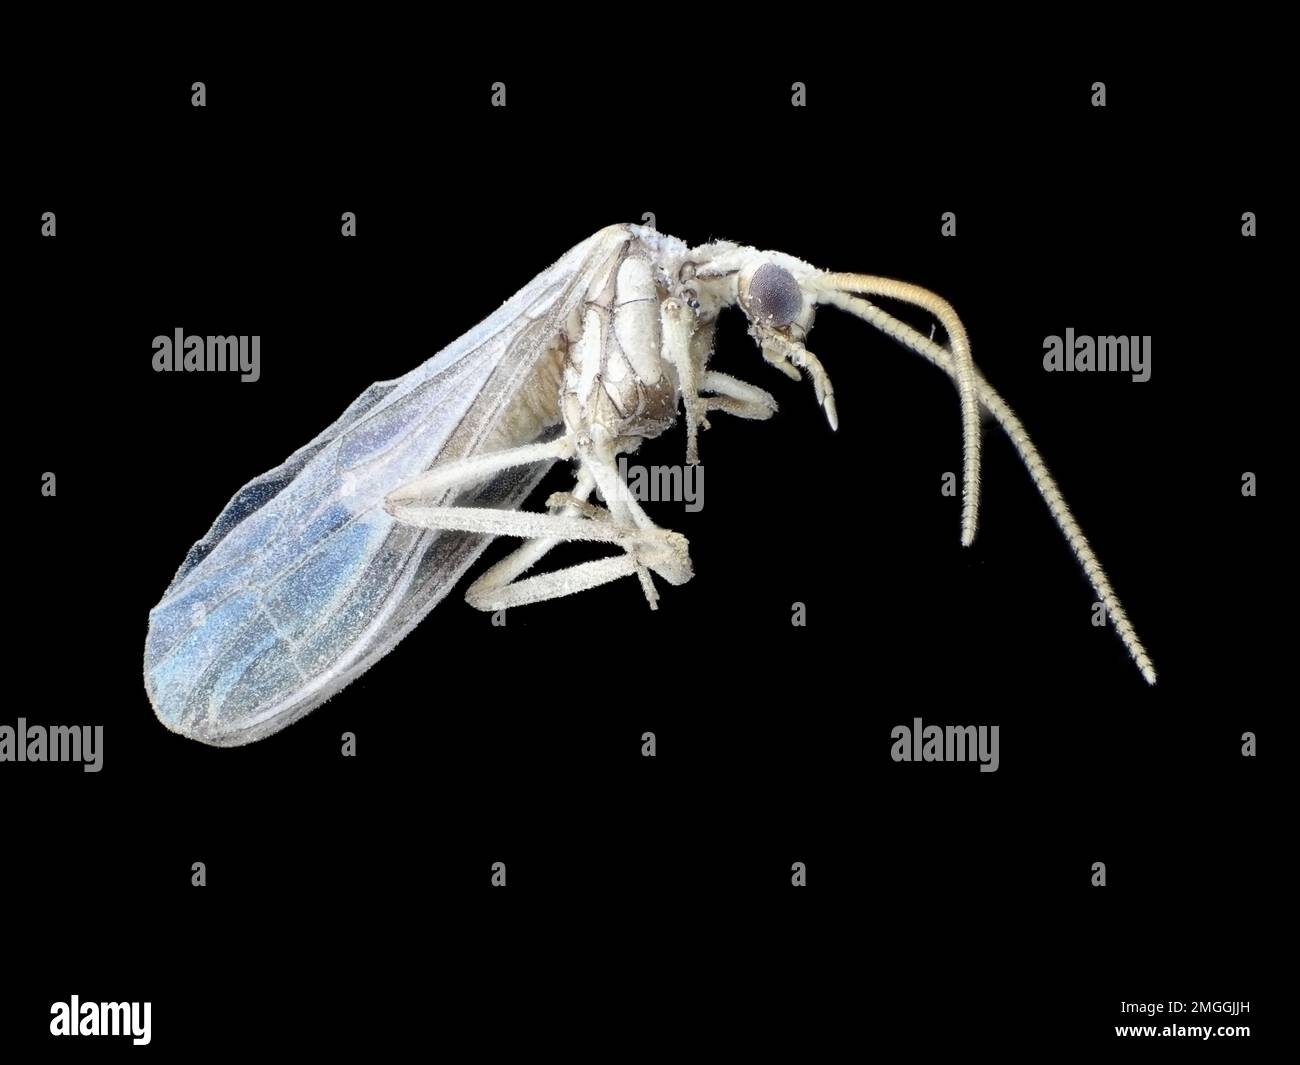 Dustywing (Coniopterygidae), about 4mm in length, under the microscope Stock Photo